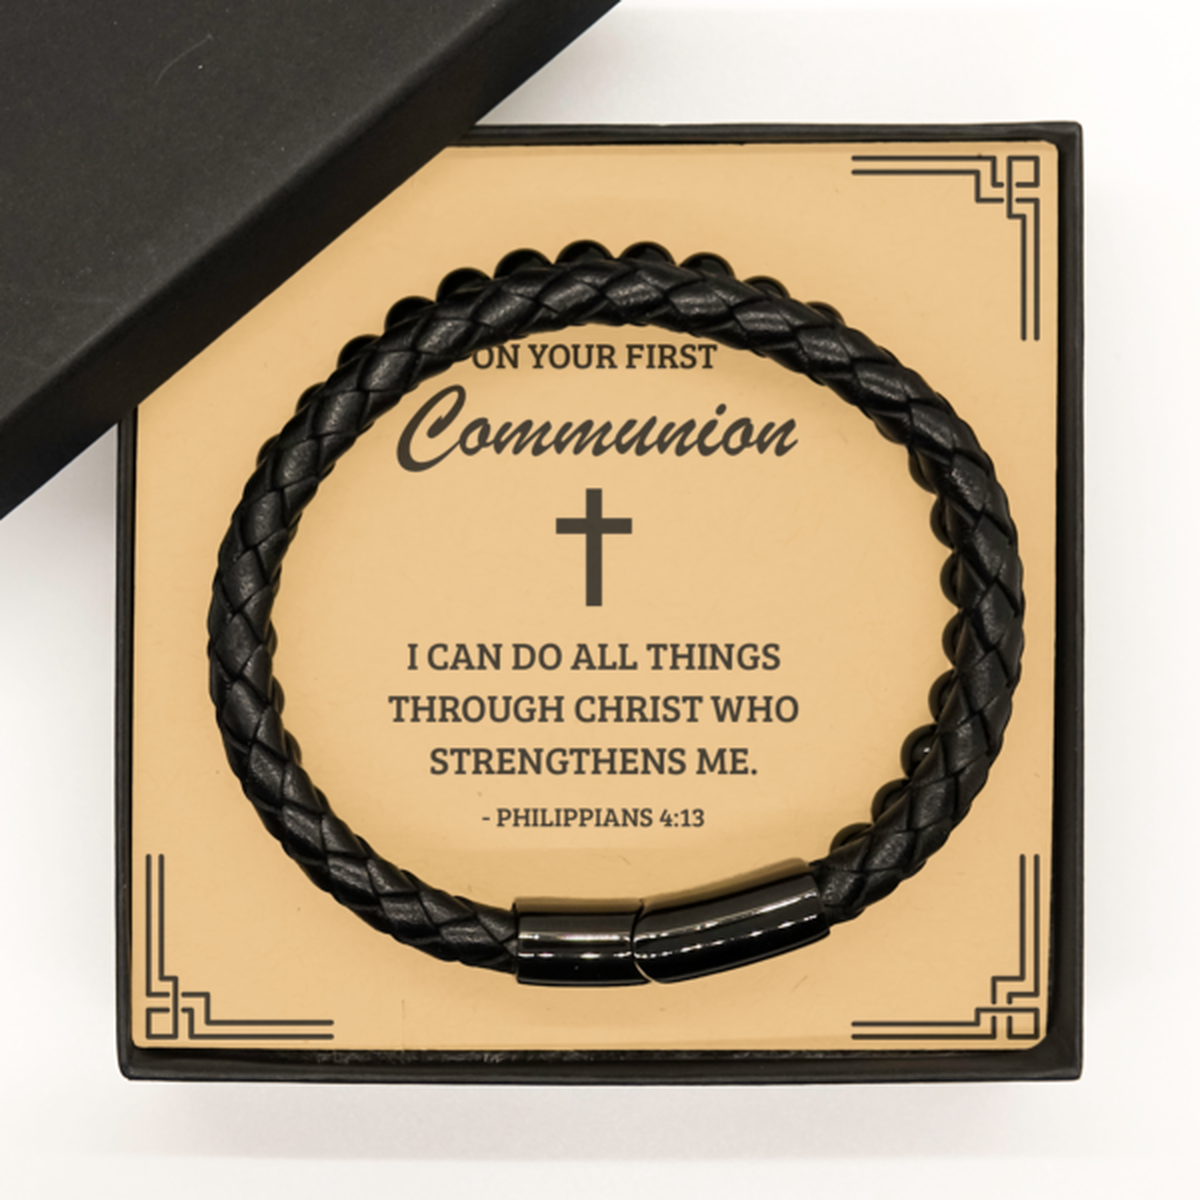 First Communion Gifts For Boys, I Can Do All Things Through Christ, 1st Communion Stone Leather Bracelet with Bible Verse Message Card for Son, Grandson